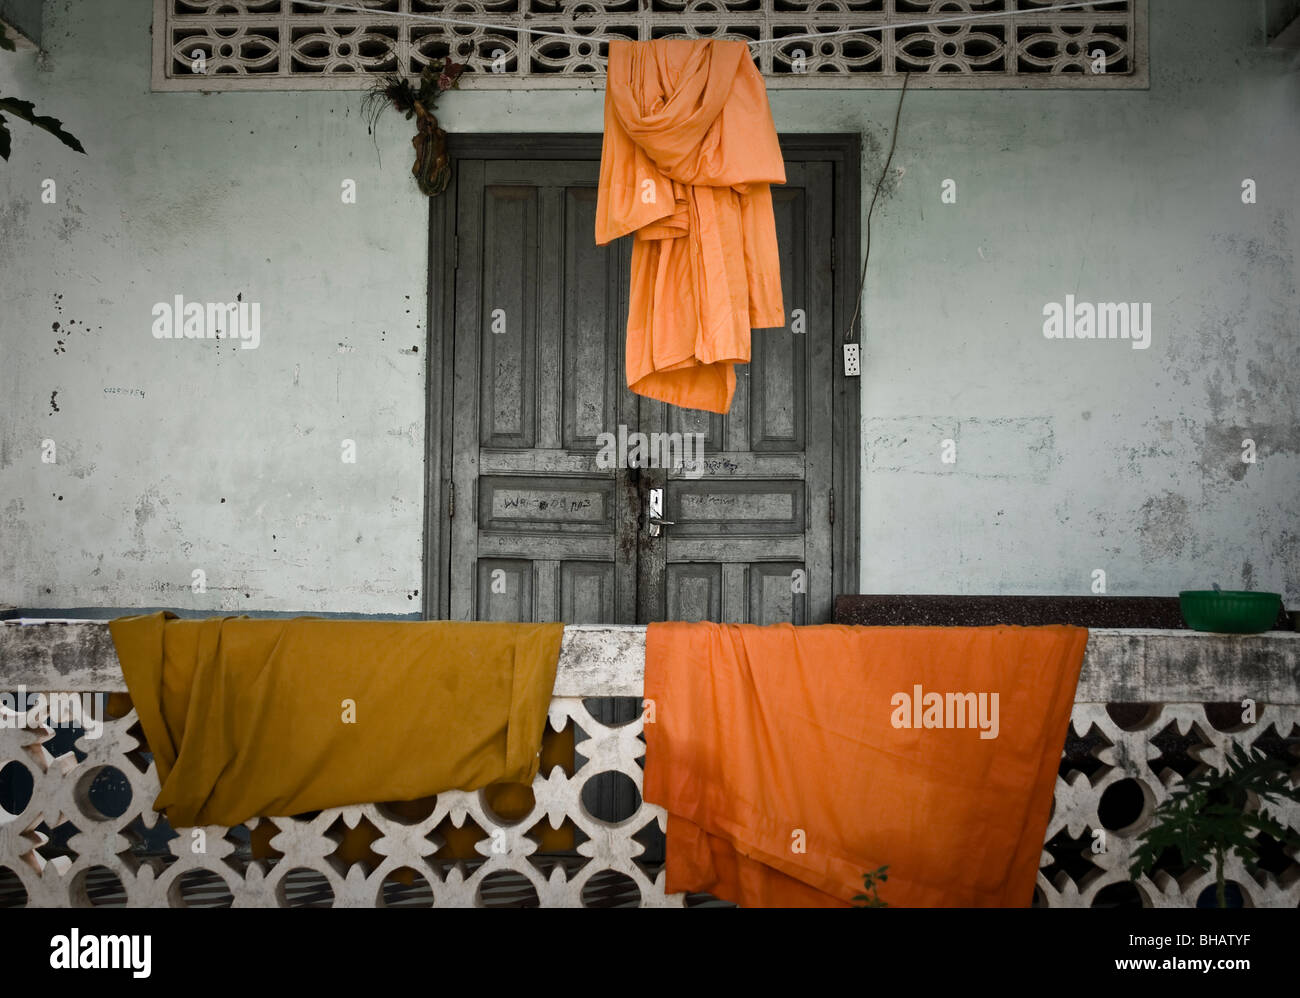 Buddhist Monks robes dry on balcony at pagoda / temple in Kralanh, Siem Reap Province, Cambodia Stock Photo